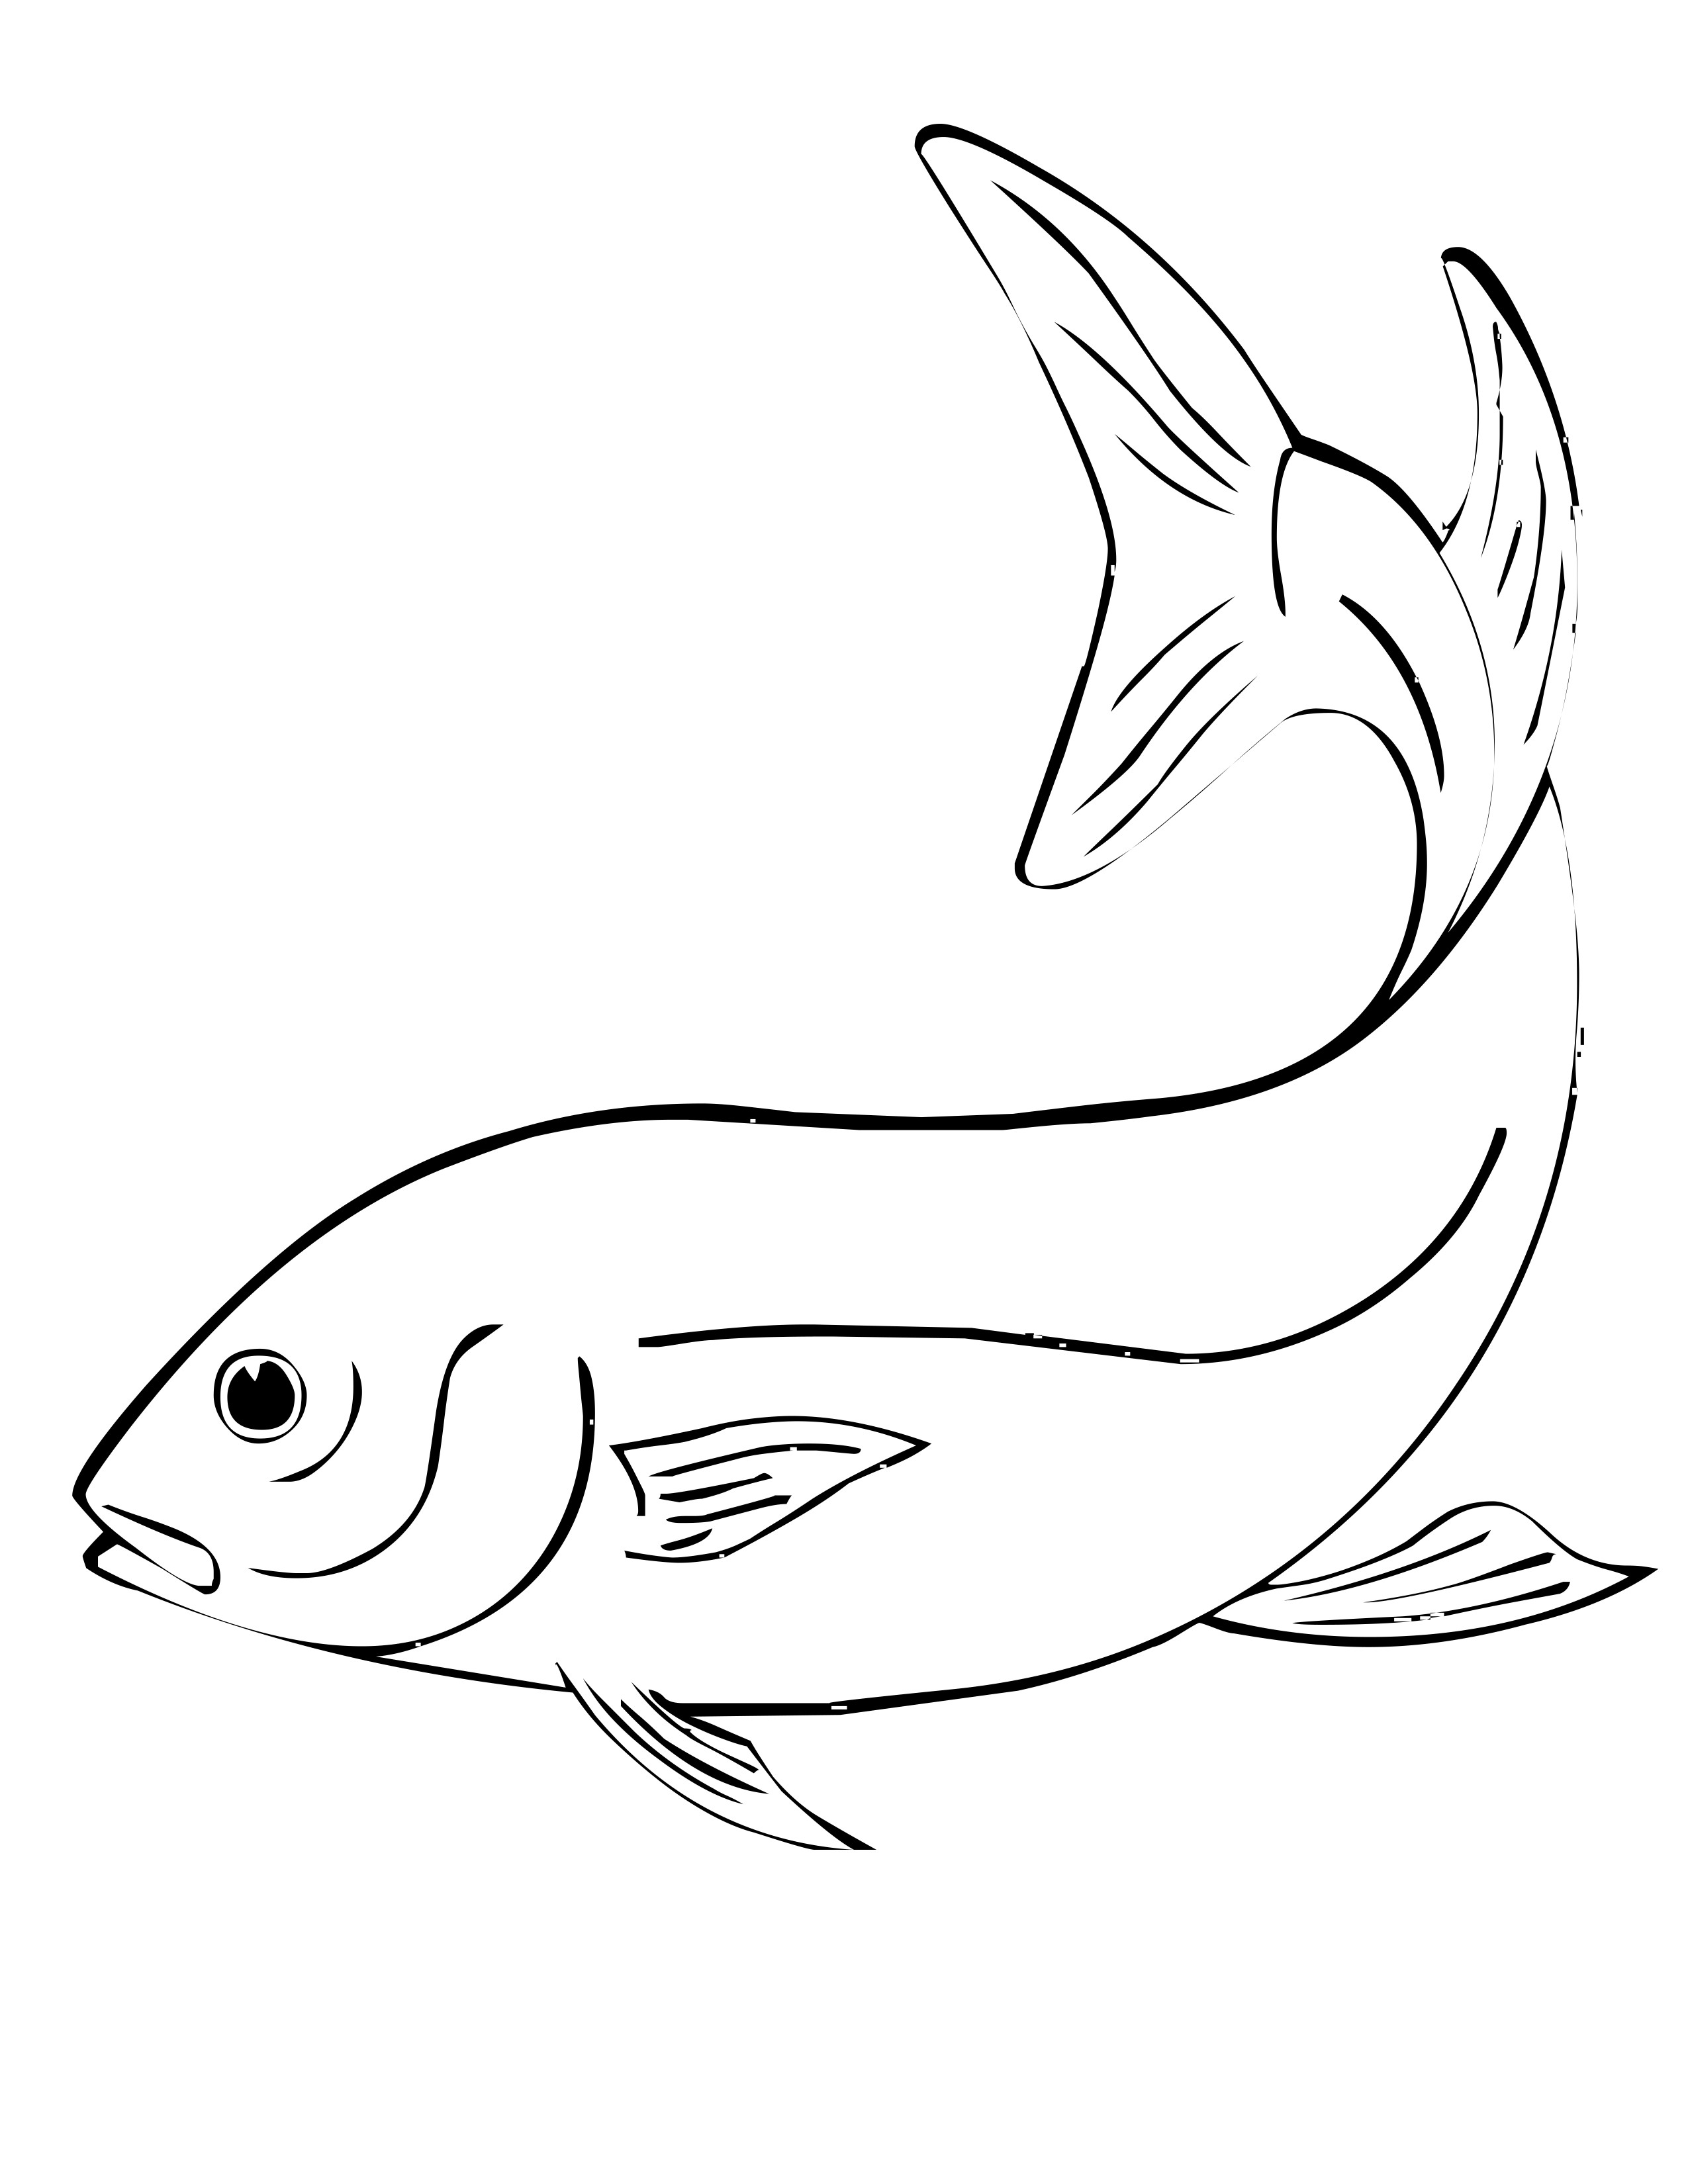 Free Printable Fish Coloring Pages For Kids Coloring Wallpapers Download Free Images Wallpaper [coloring365.blogspot.com]